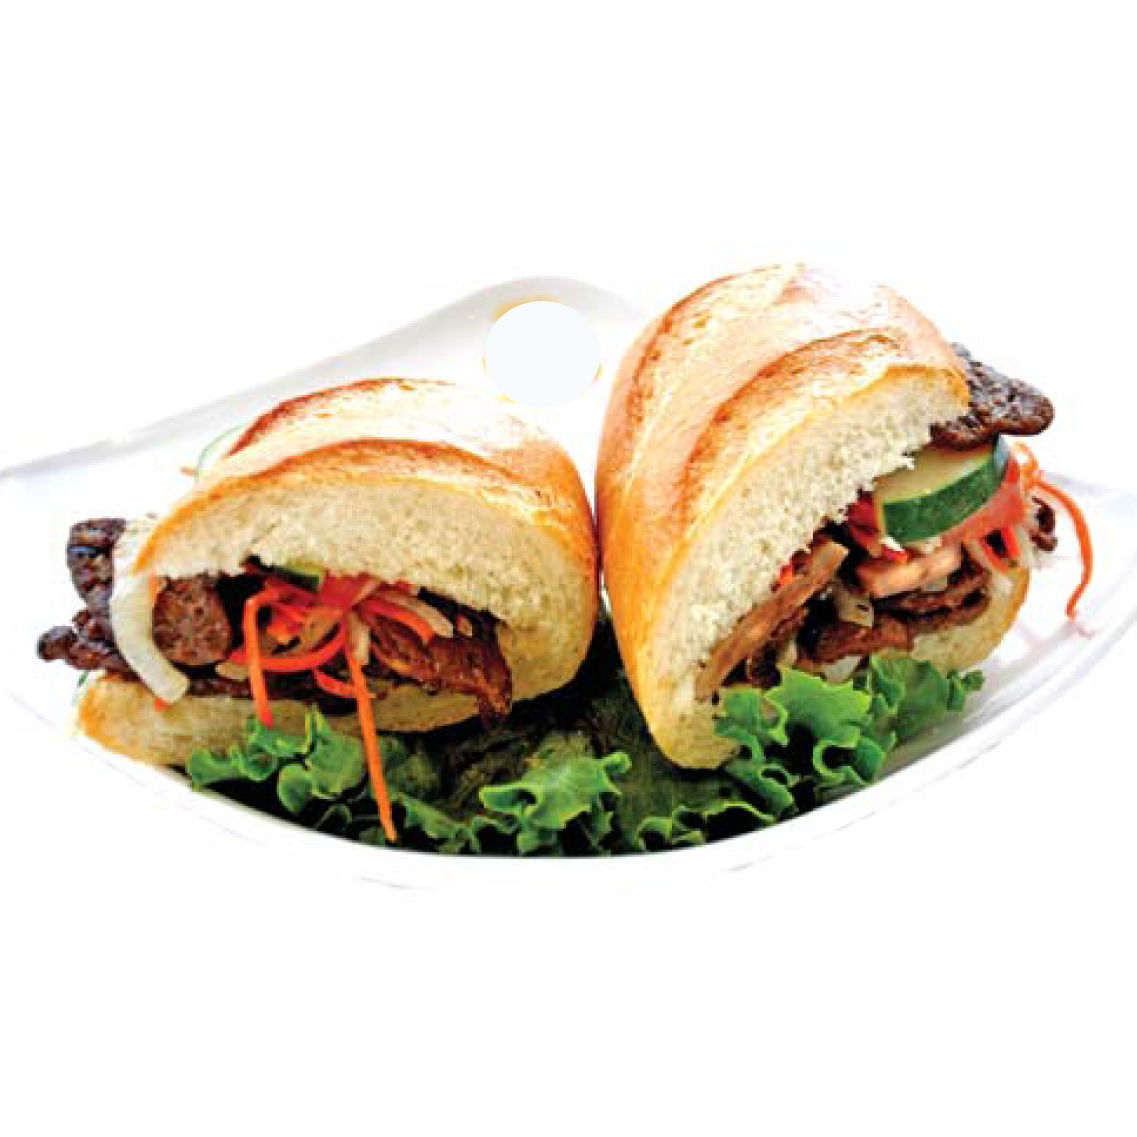 item  Banh Mi Baguette with Chickless Saute 